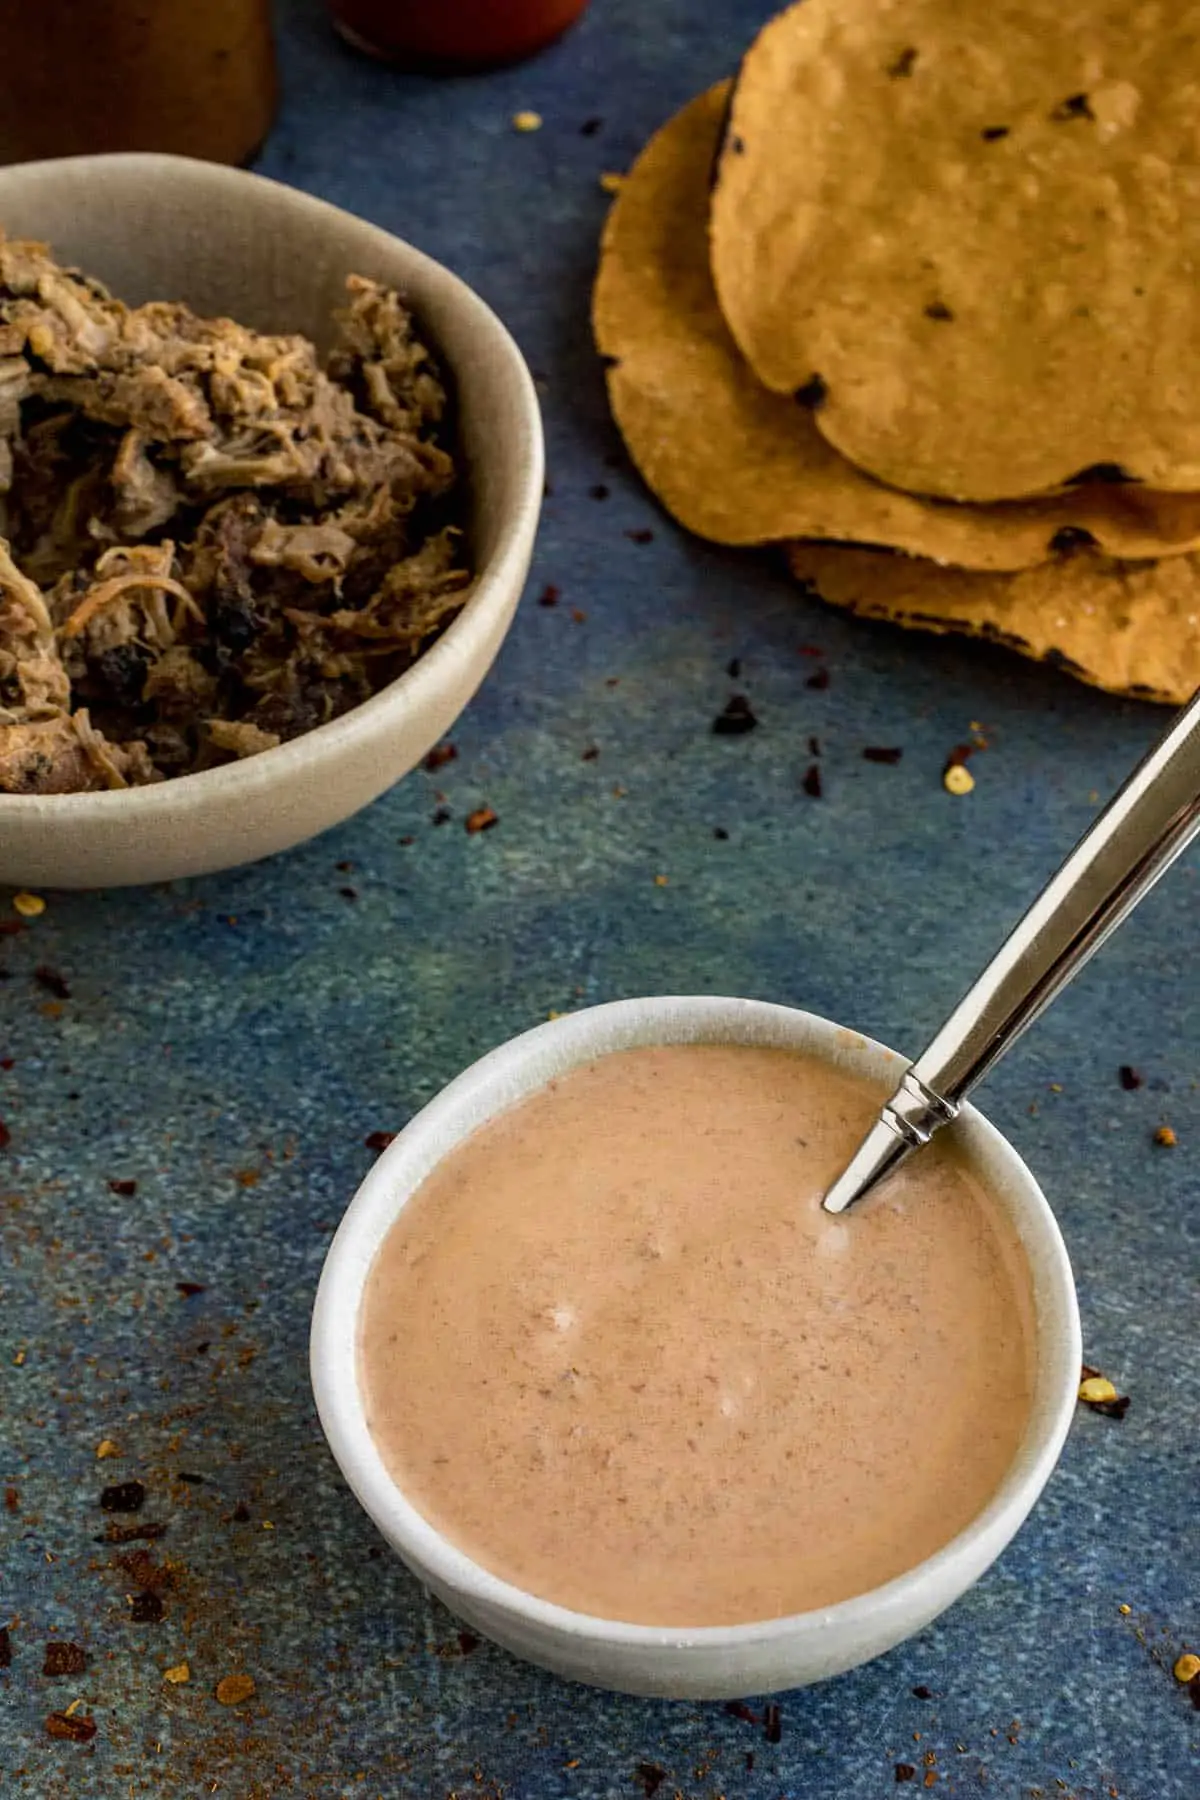 Chipotle Mayo in a bowl, served with pulled pork and tortillas